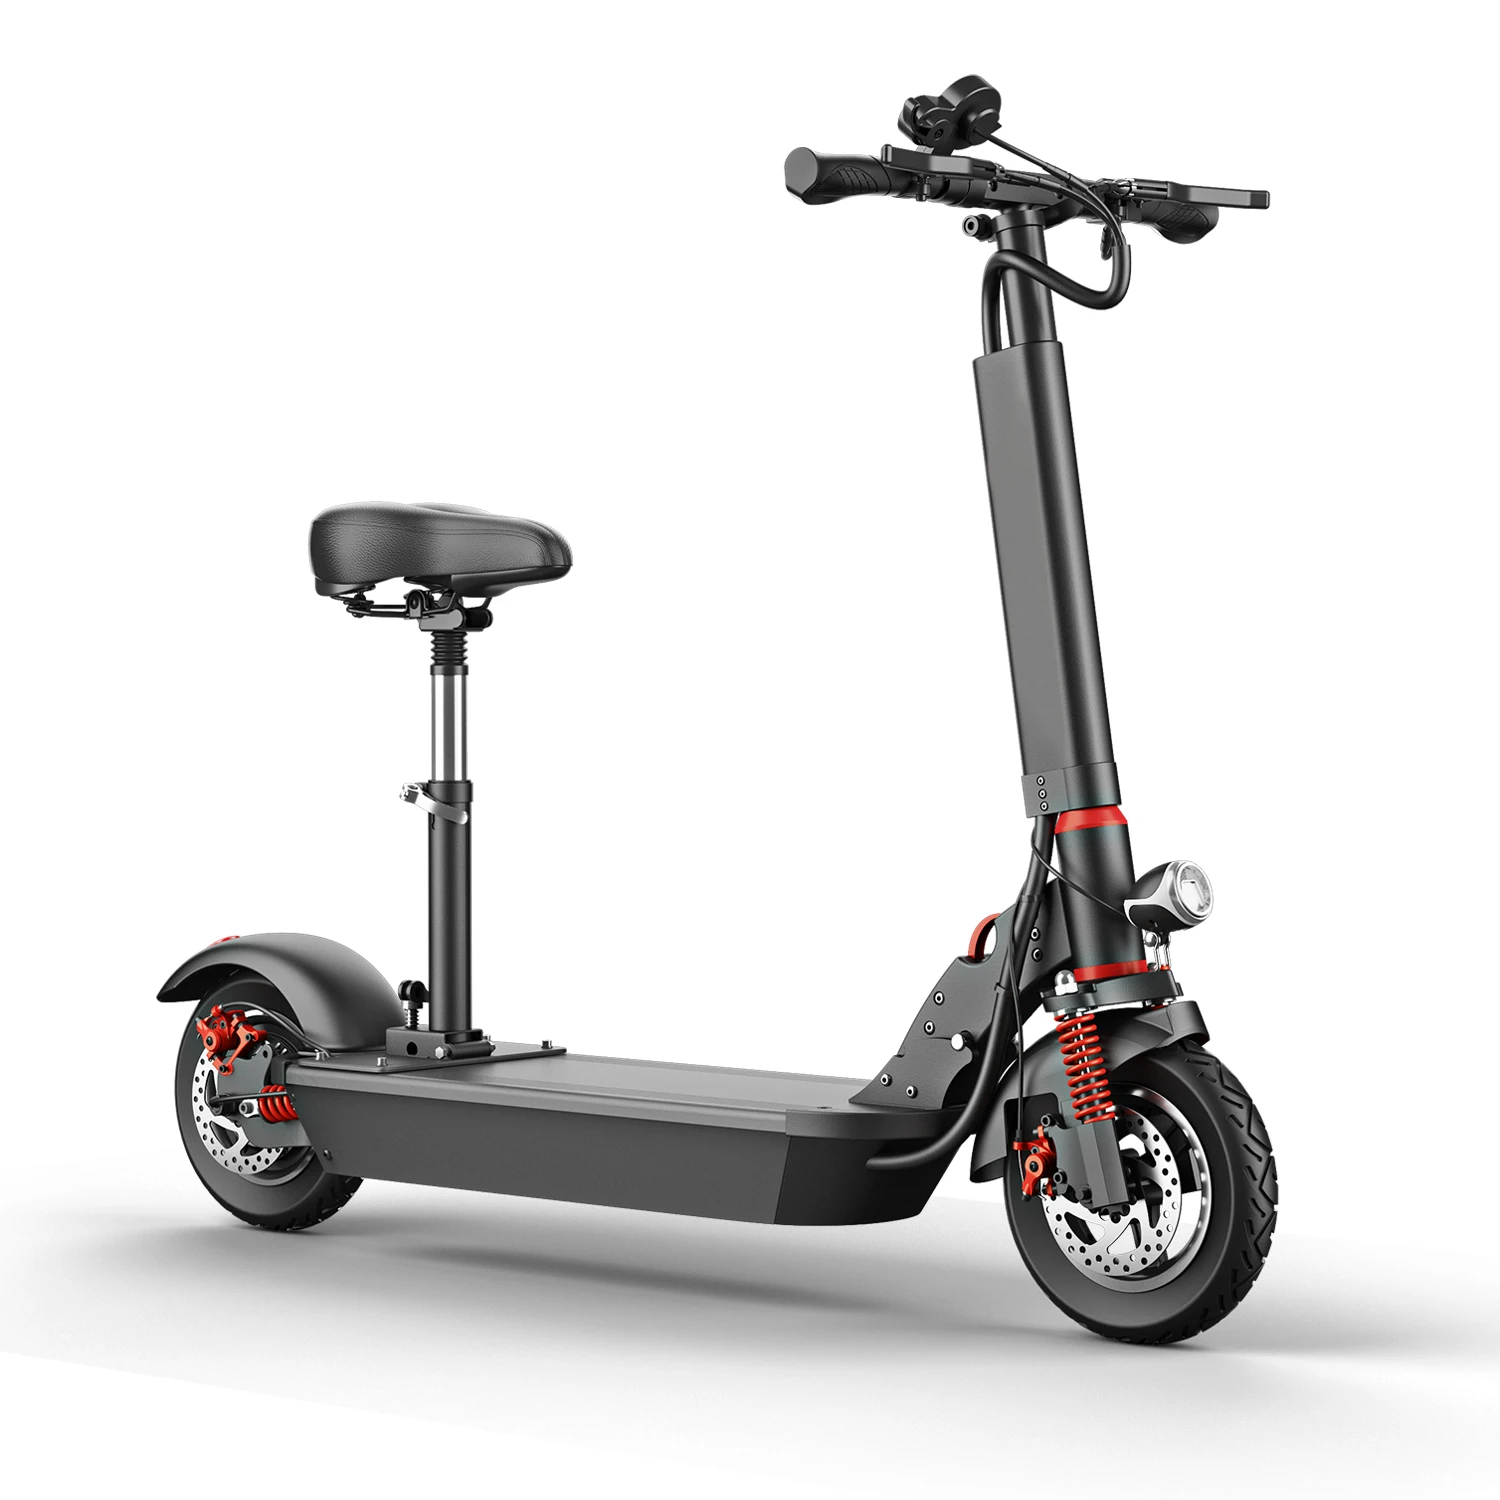 shipping free ! Electric scooter 500W 48V 15ah 10 inch range 40-50km speed 45km/h two wheel foldable adult, Black